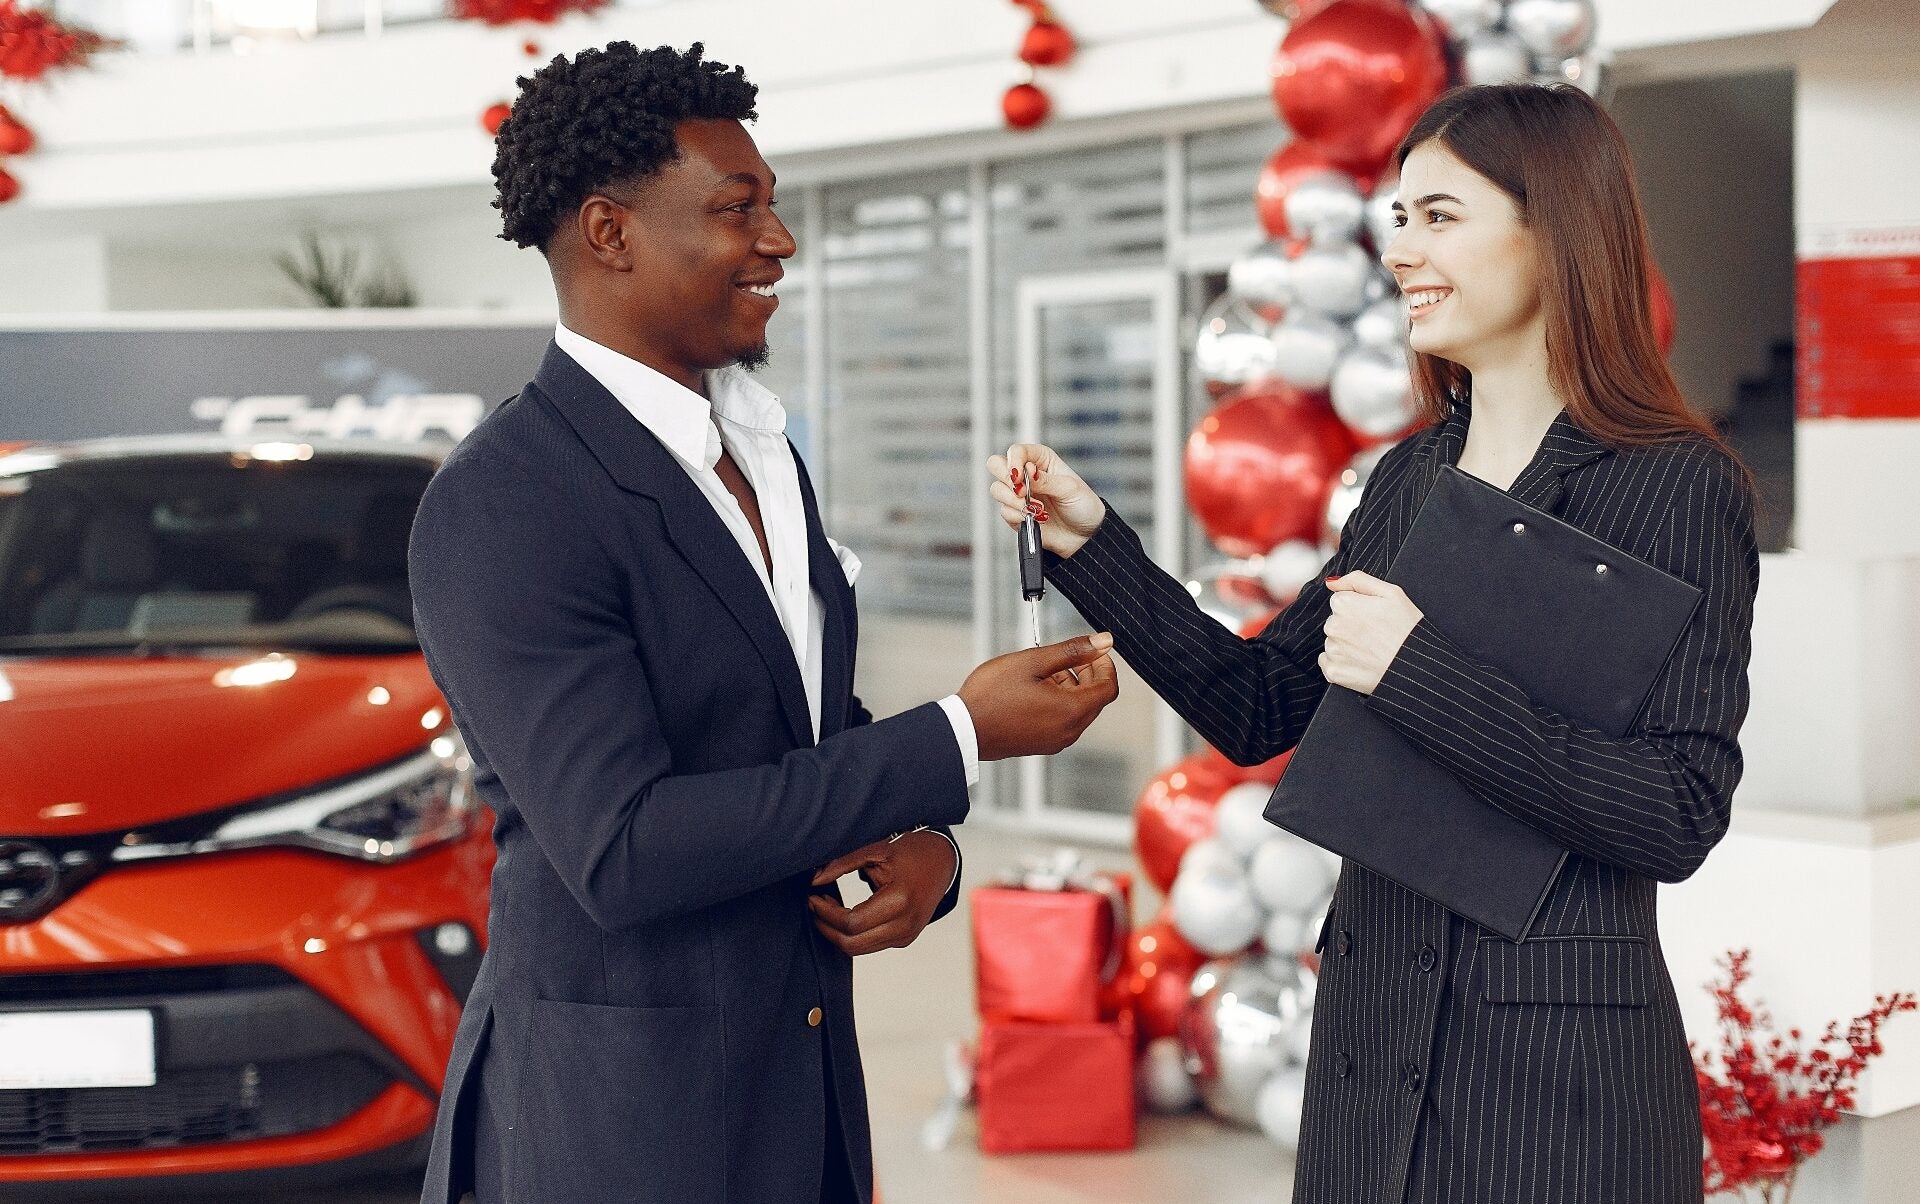 A smiling woman hands a man the keys to a car he just successfully leased